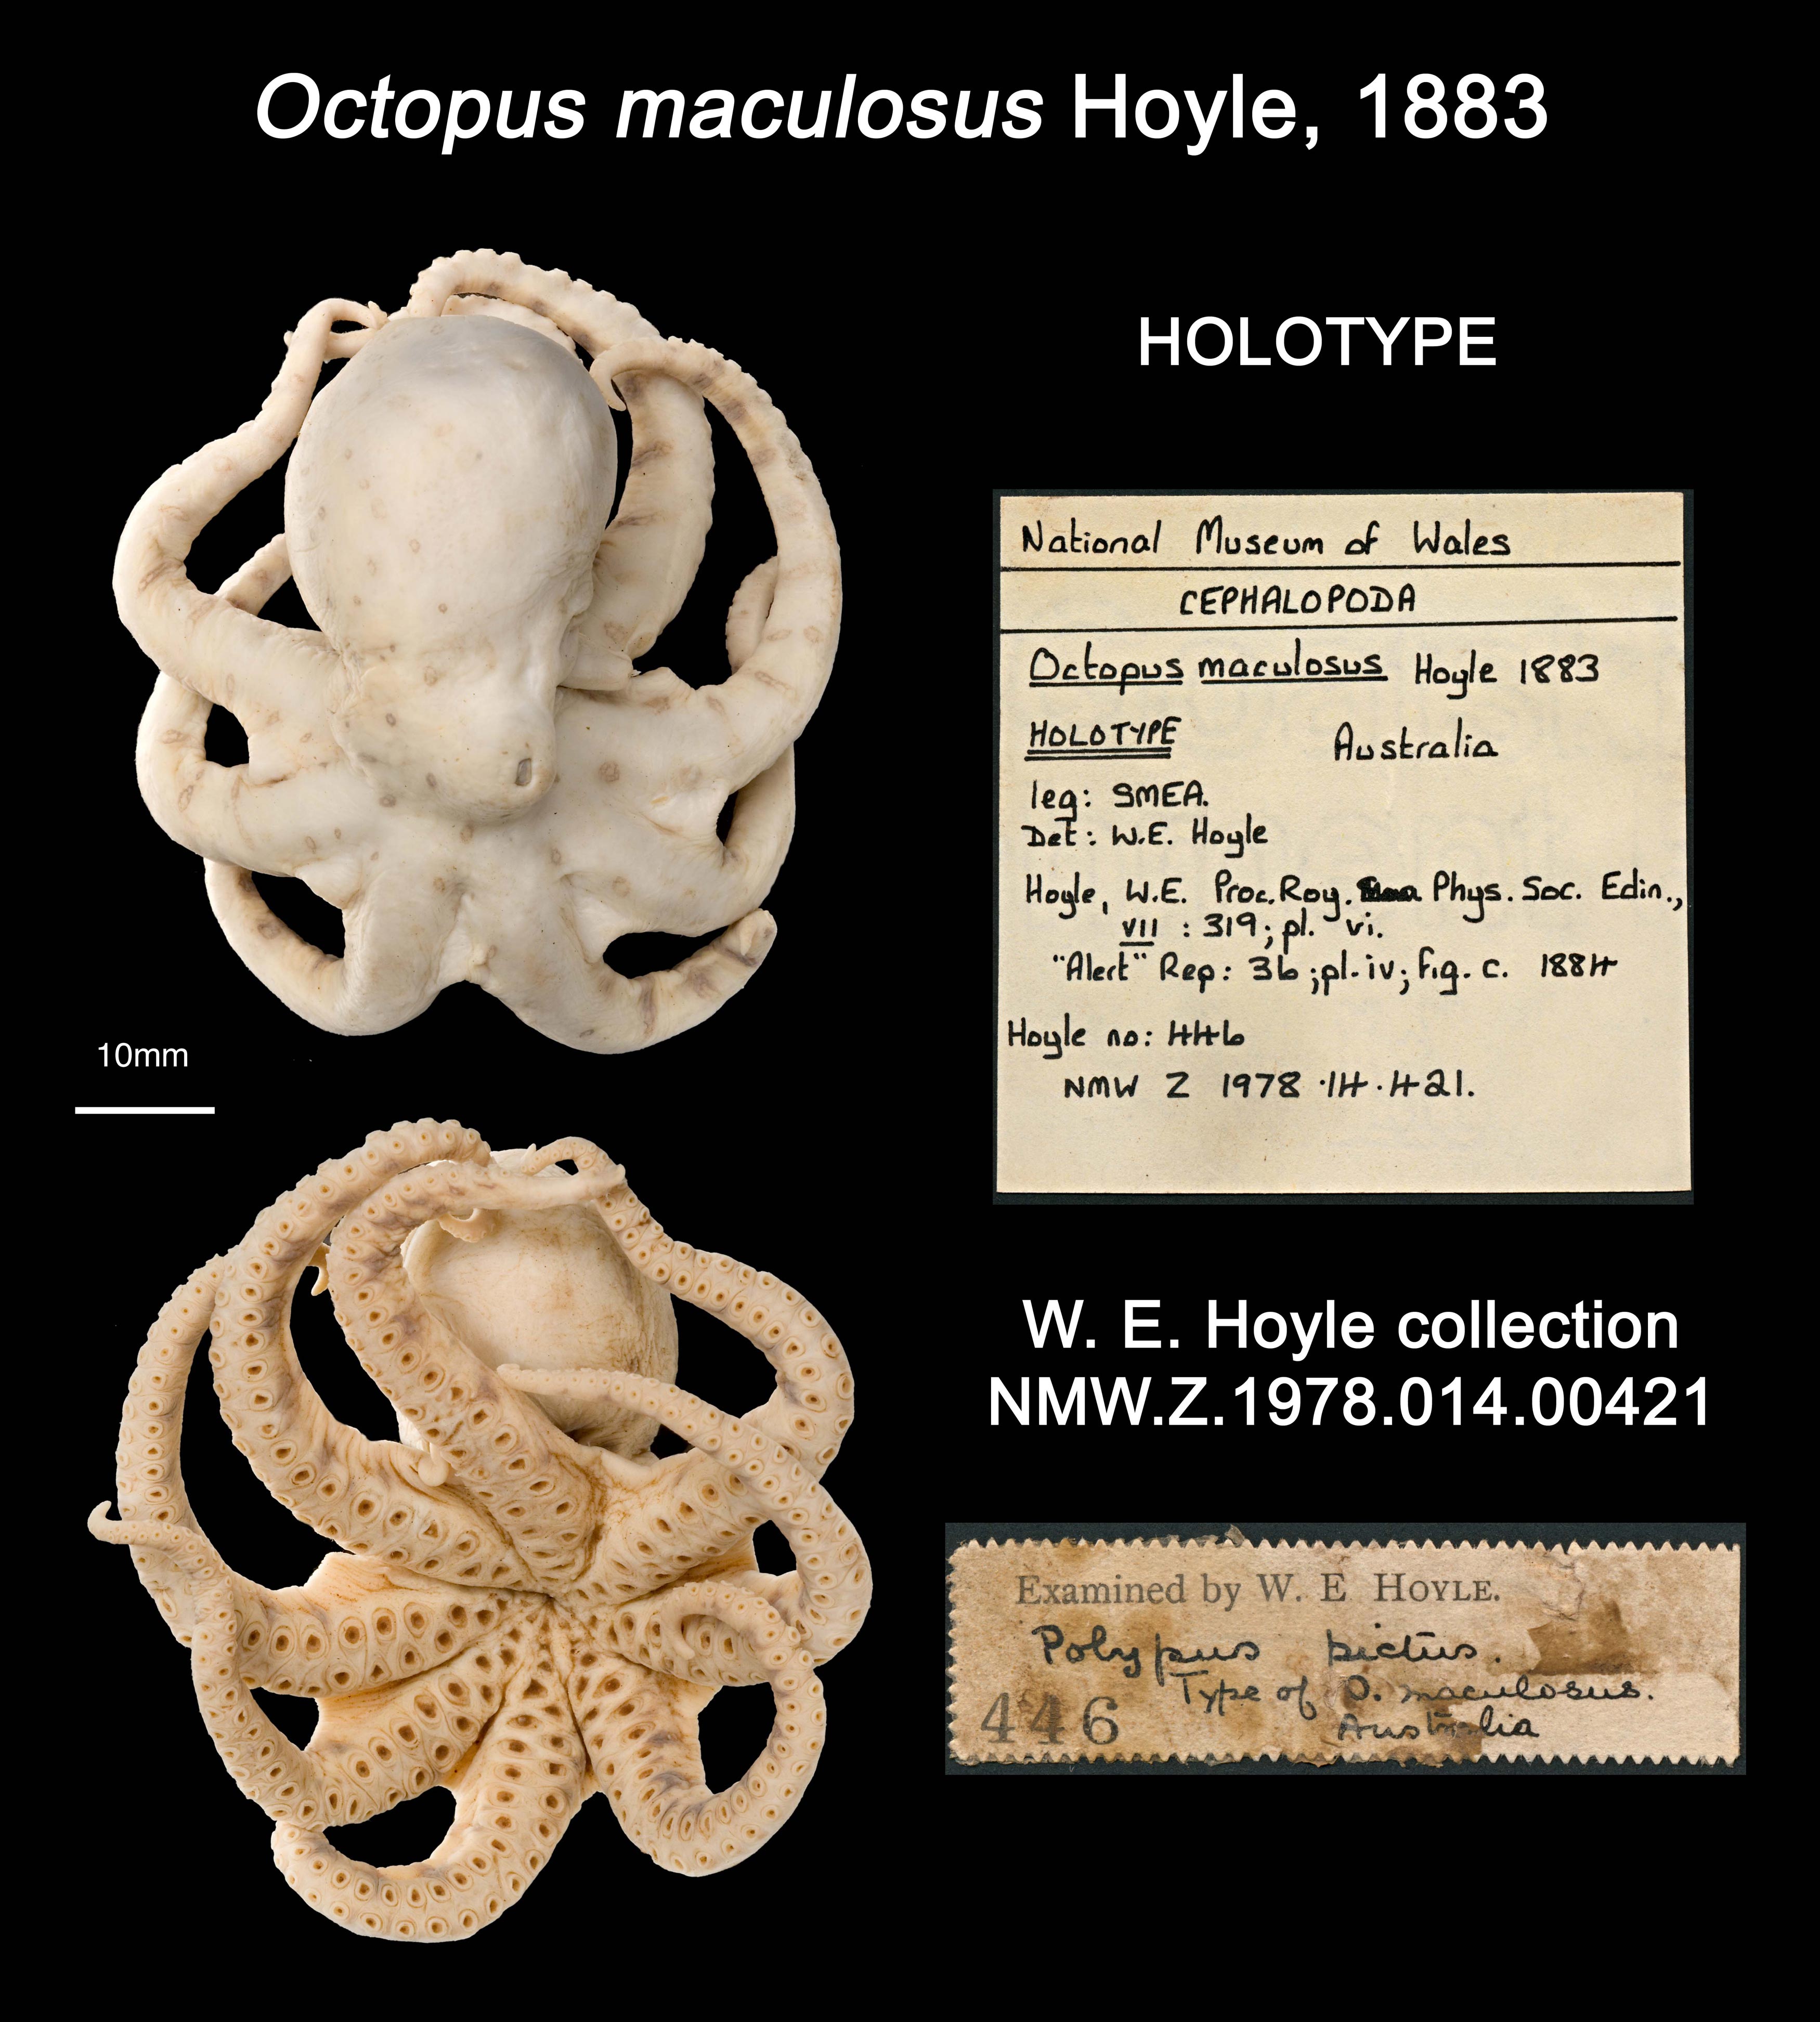 Specimen images and labels for the type of <em>Octopus maculosus</em> described by our first director, Williams Evans Hoyle, in 1883.